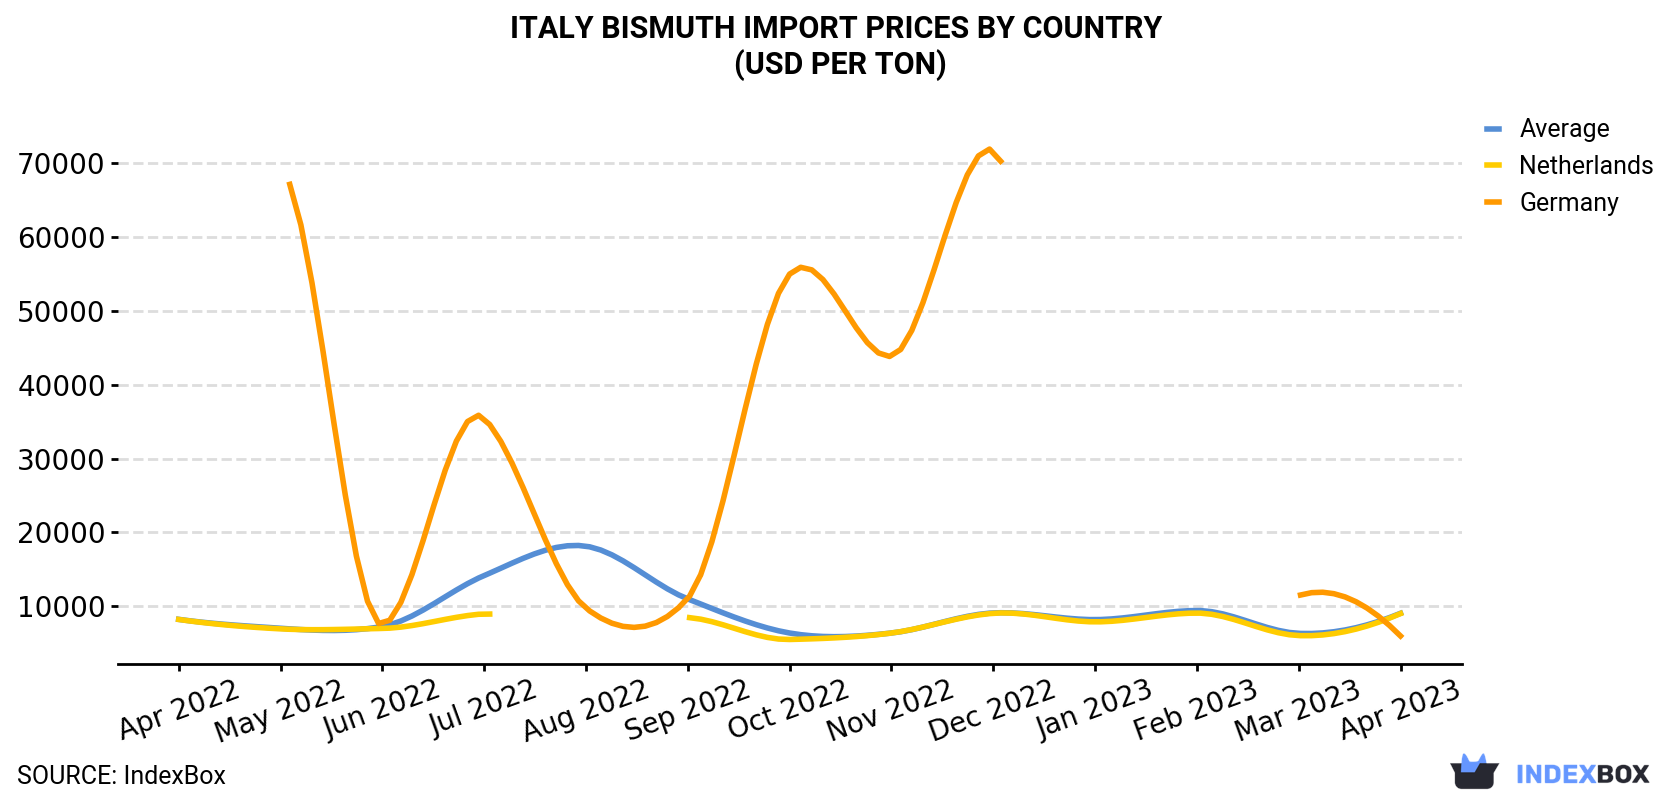 Italy Bismuth Import Prices By Country (USD Per Ton)